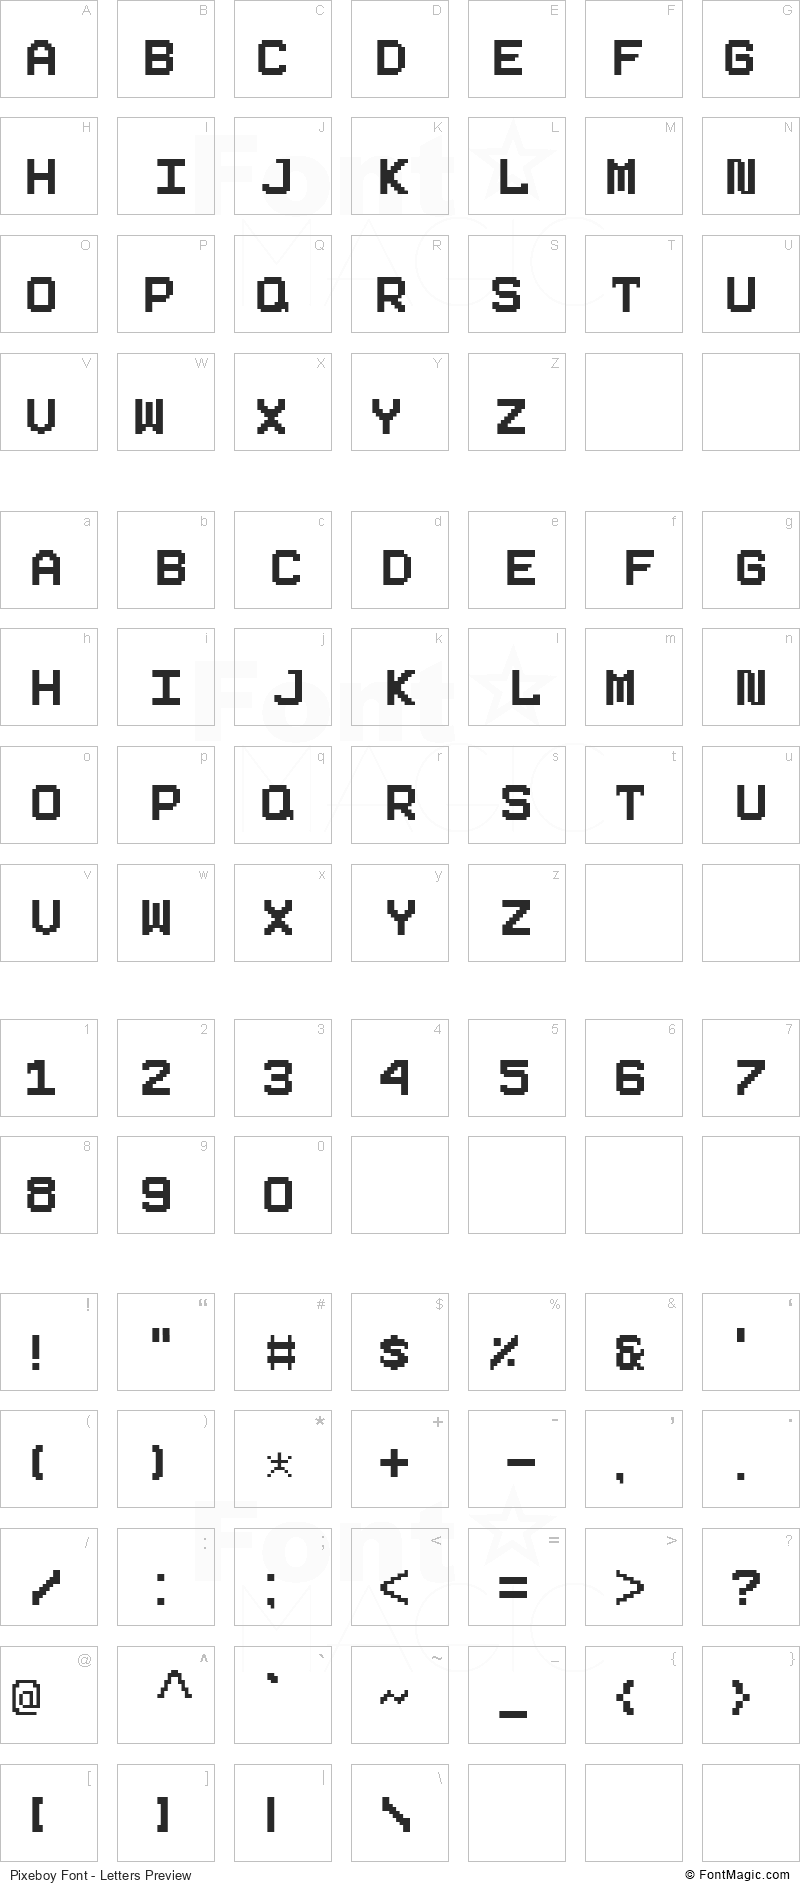 Pixeboy Font - All Latters Preview Chart